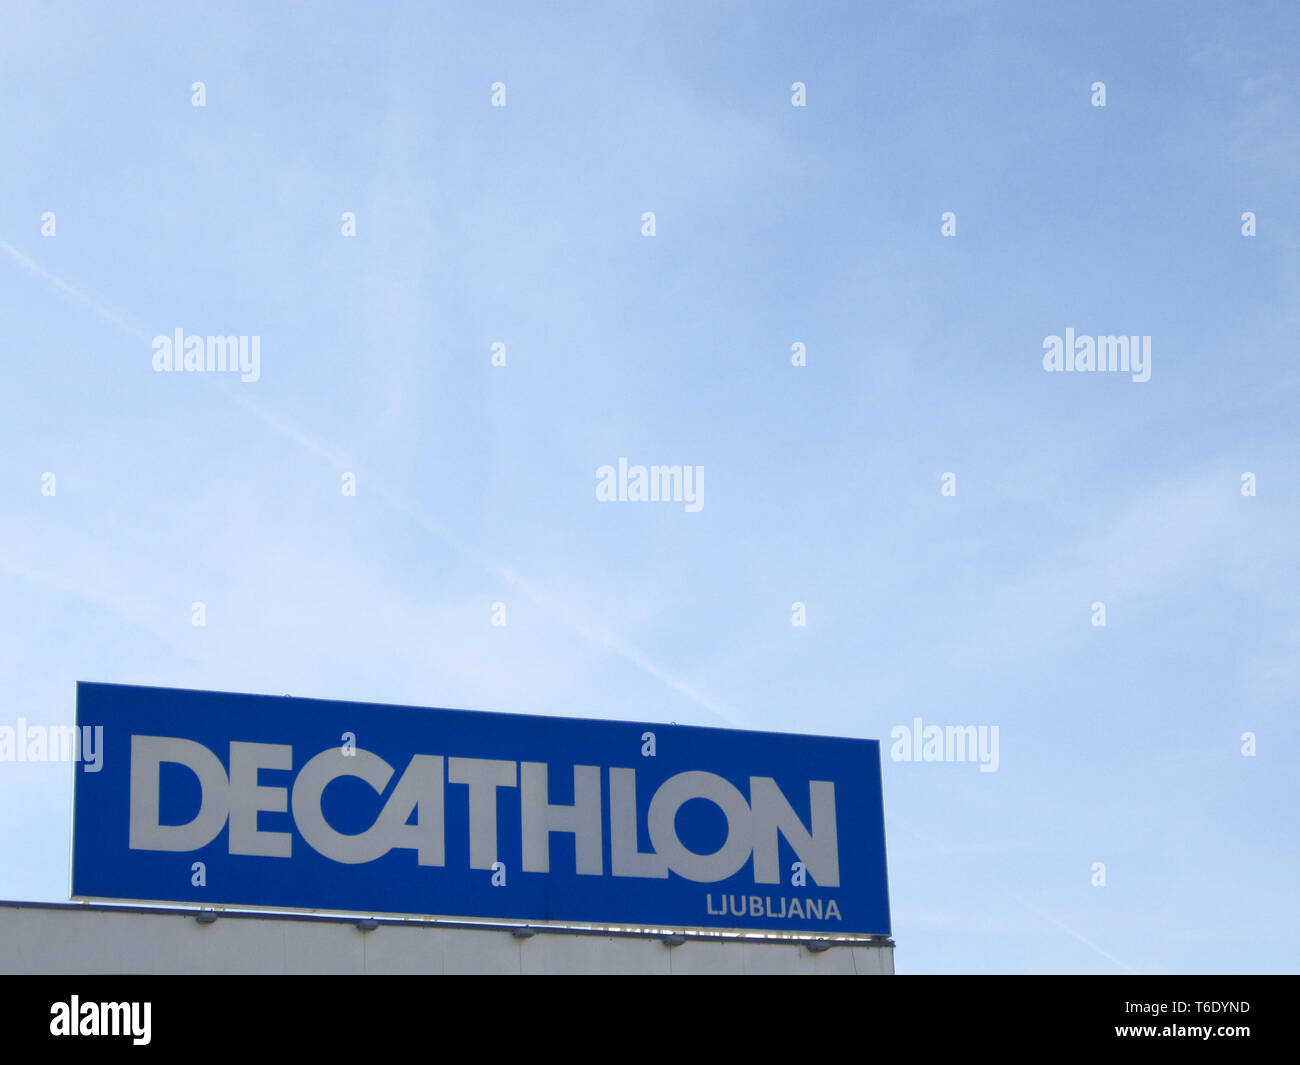 LJUBLJANA, SLOVENIA - MARCH 22 2019: Decathlon sign on a wall. Decathlon is a french company and one of the world's largest sporting goods retailers Stock Photo